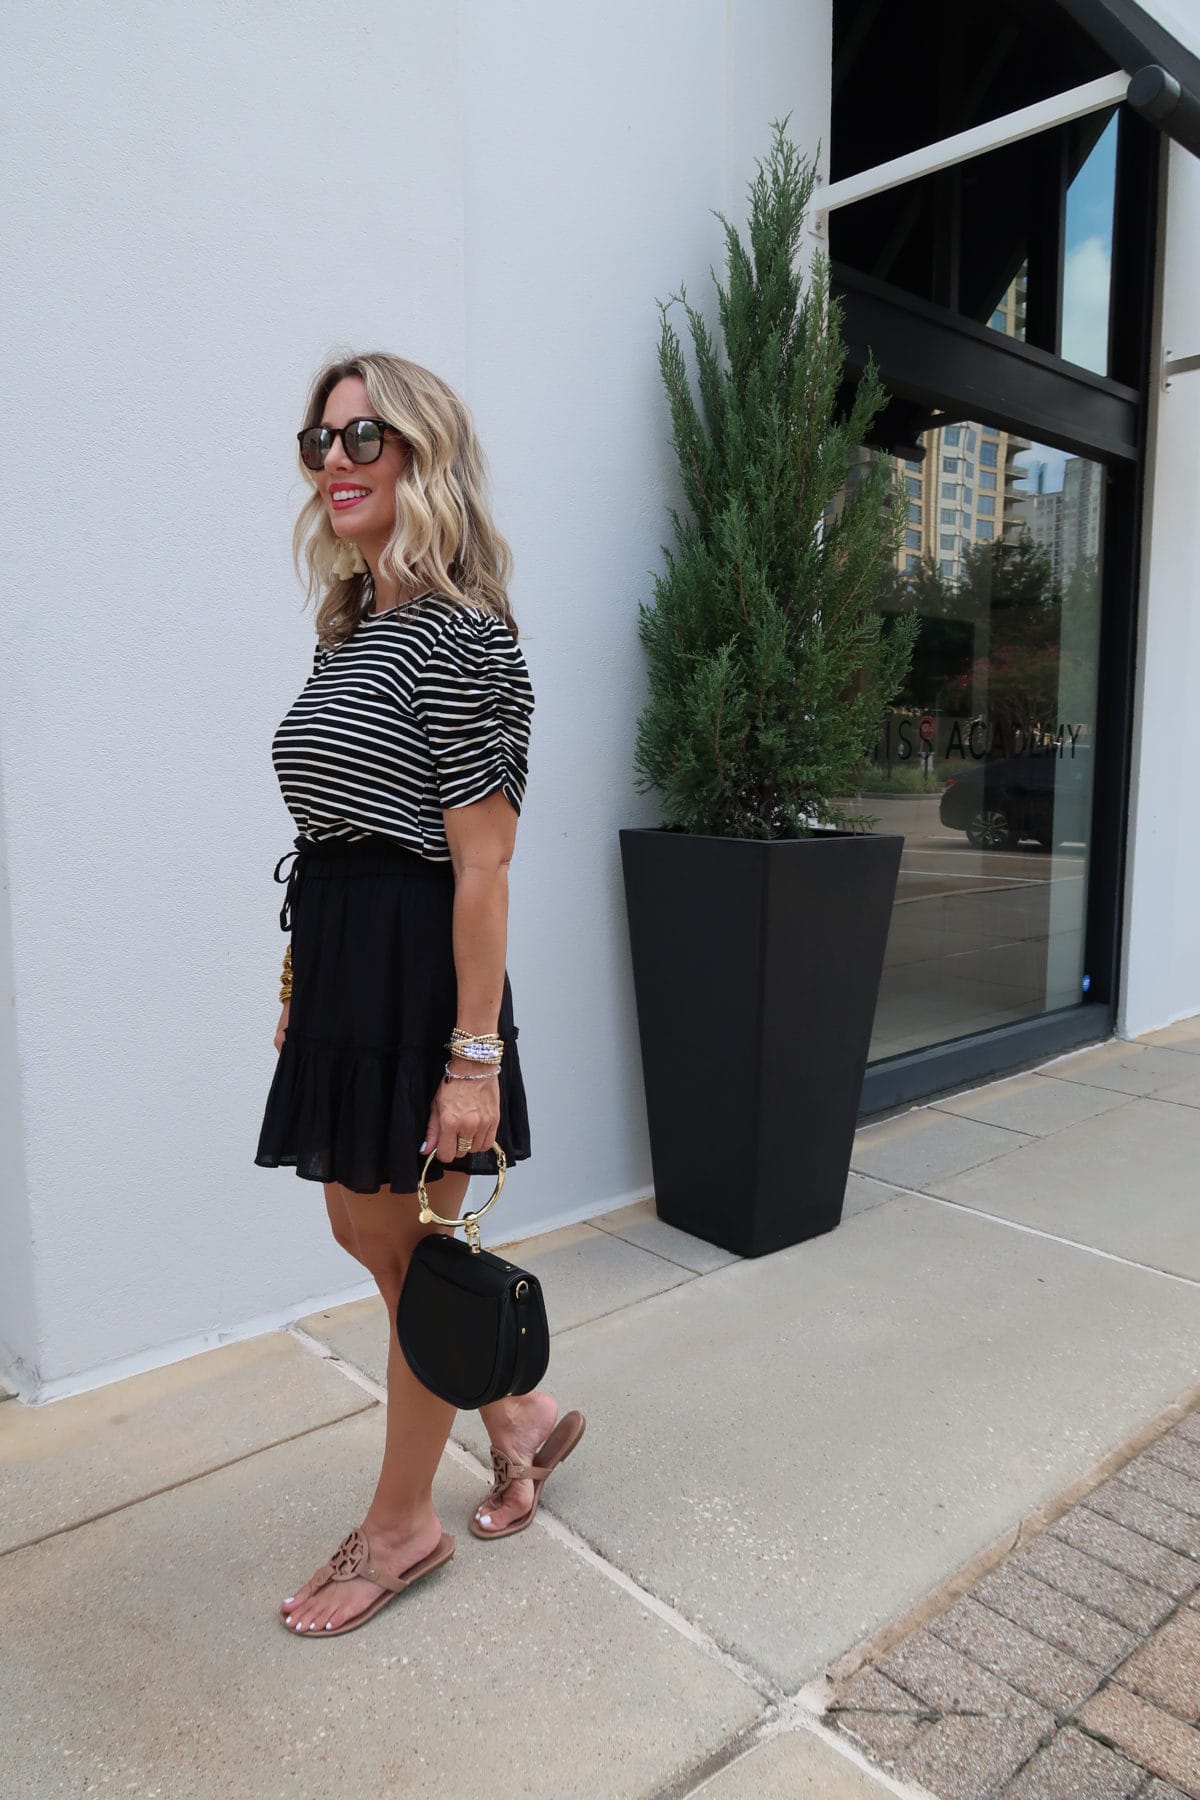 New Summer Styles, Gibson and Nordstrom, Stripe Top, Black Tiered Skirt, Miller Sandals, Ring Bag